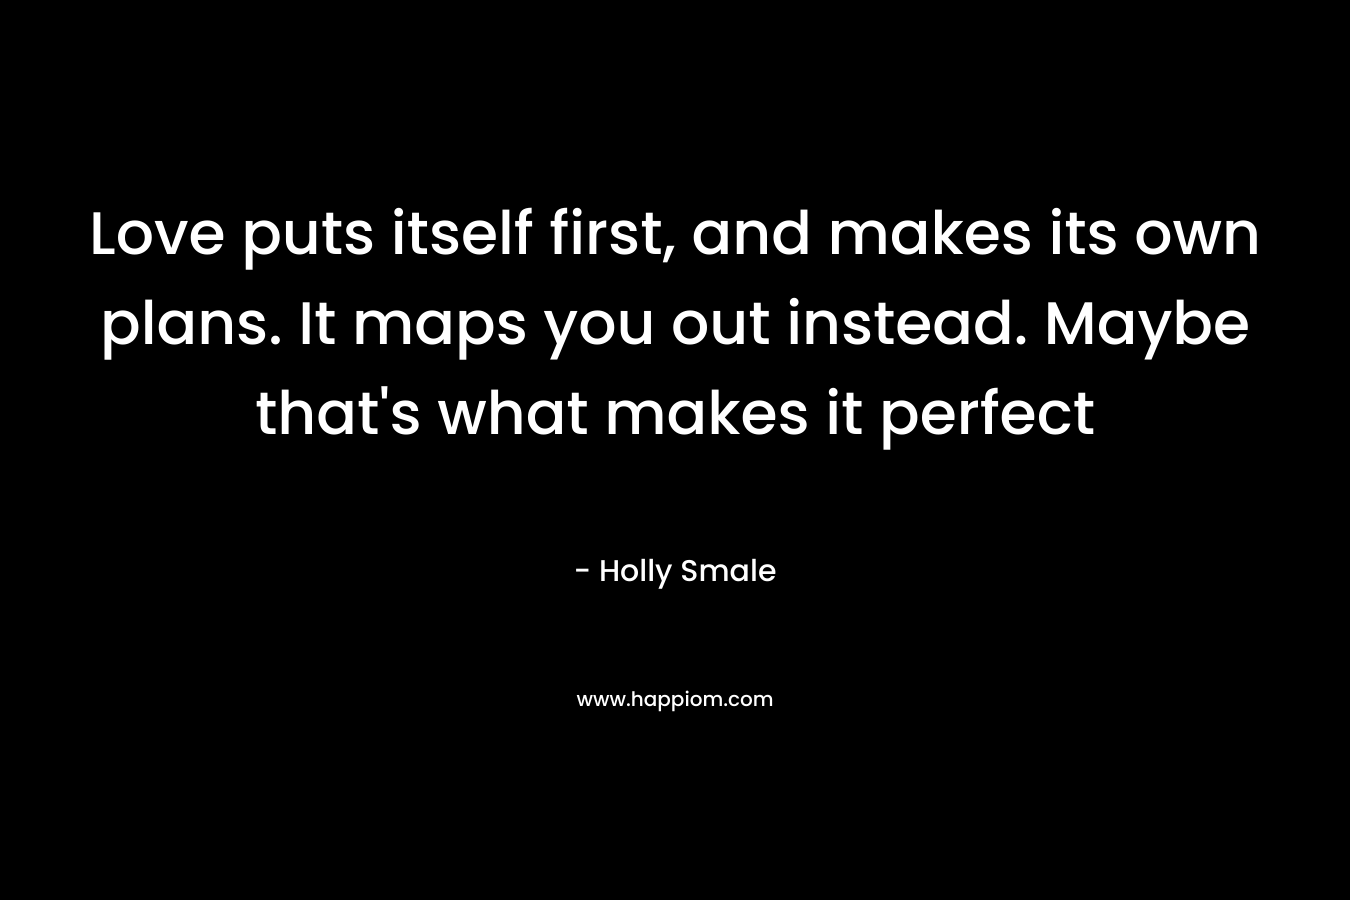 Love puts itself first, and makes its own plans. It maps you out instead. Maybe that’s what makes it perfect – Holly Smale